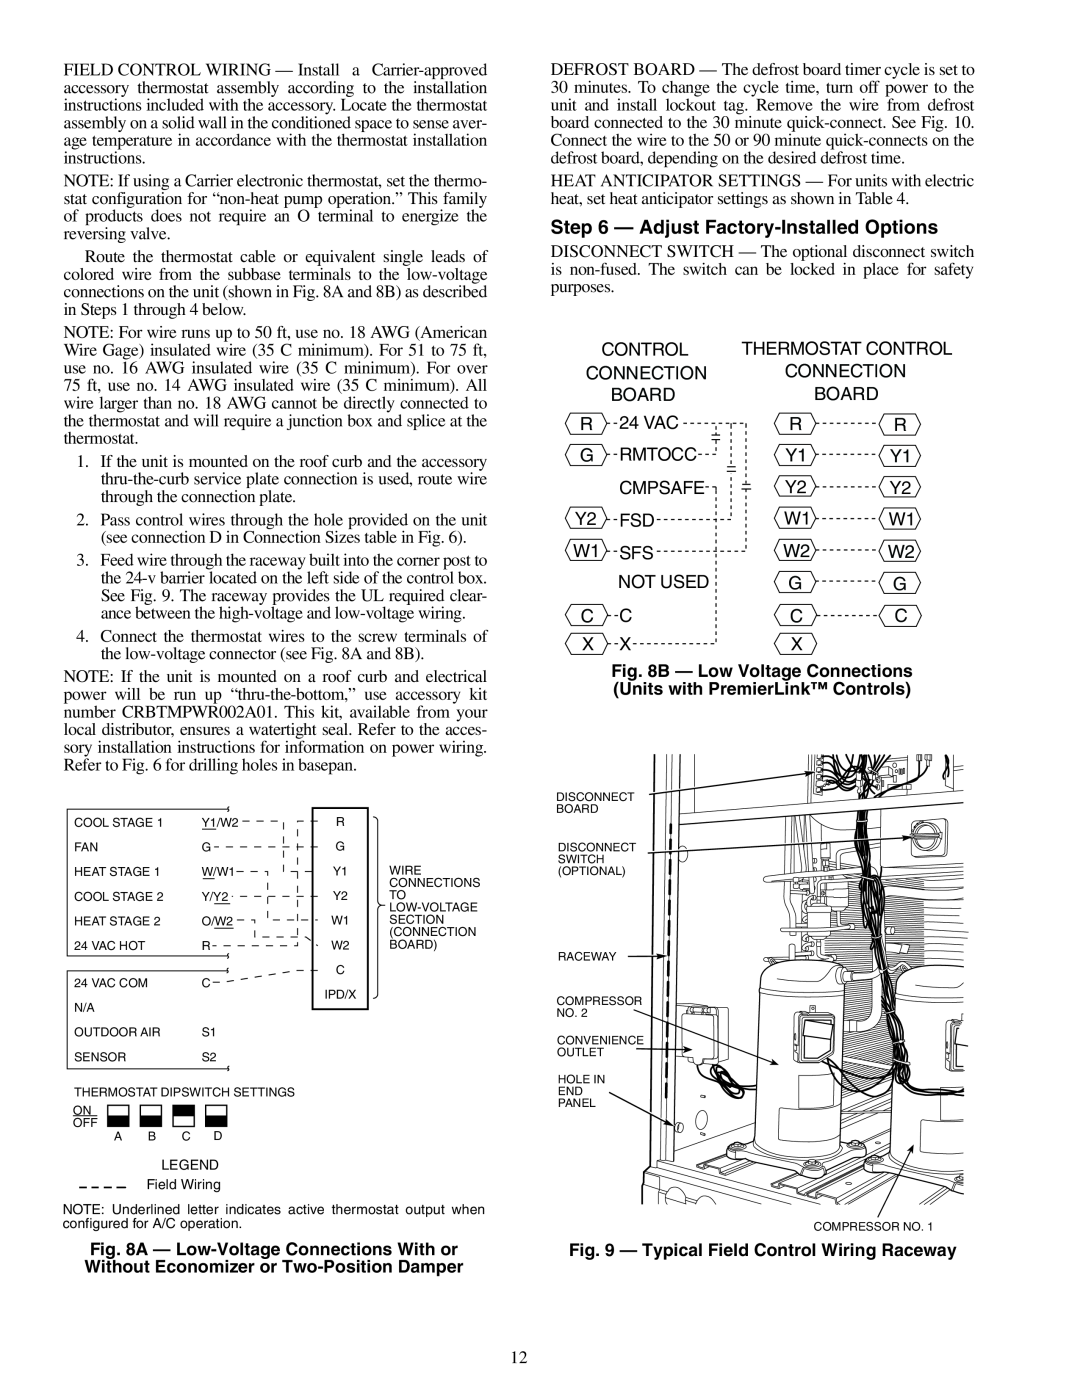 Carrier 50TFQ008-012 specifications Adjust Factory-InstalledOptions 